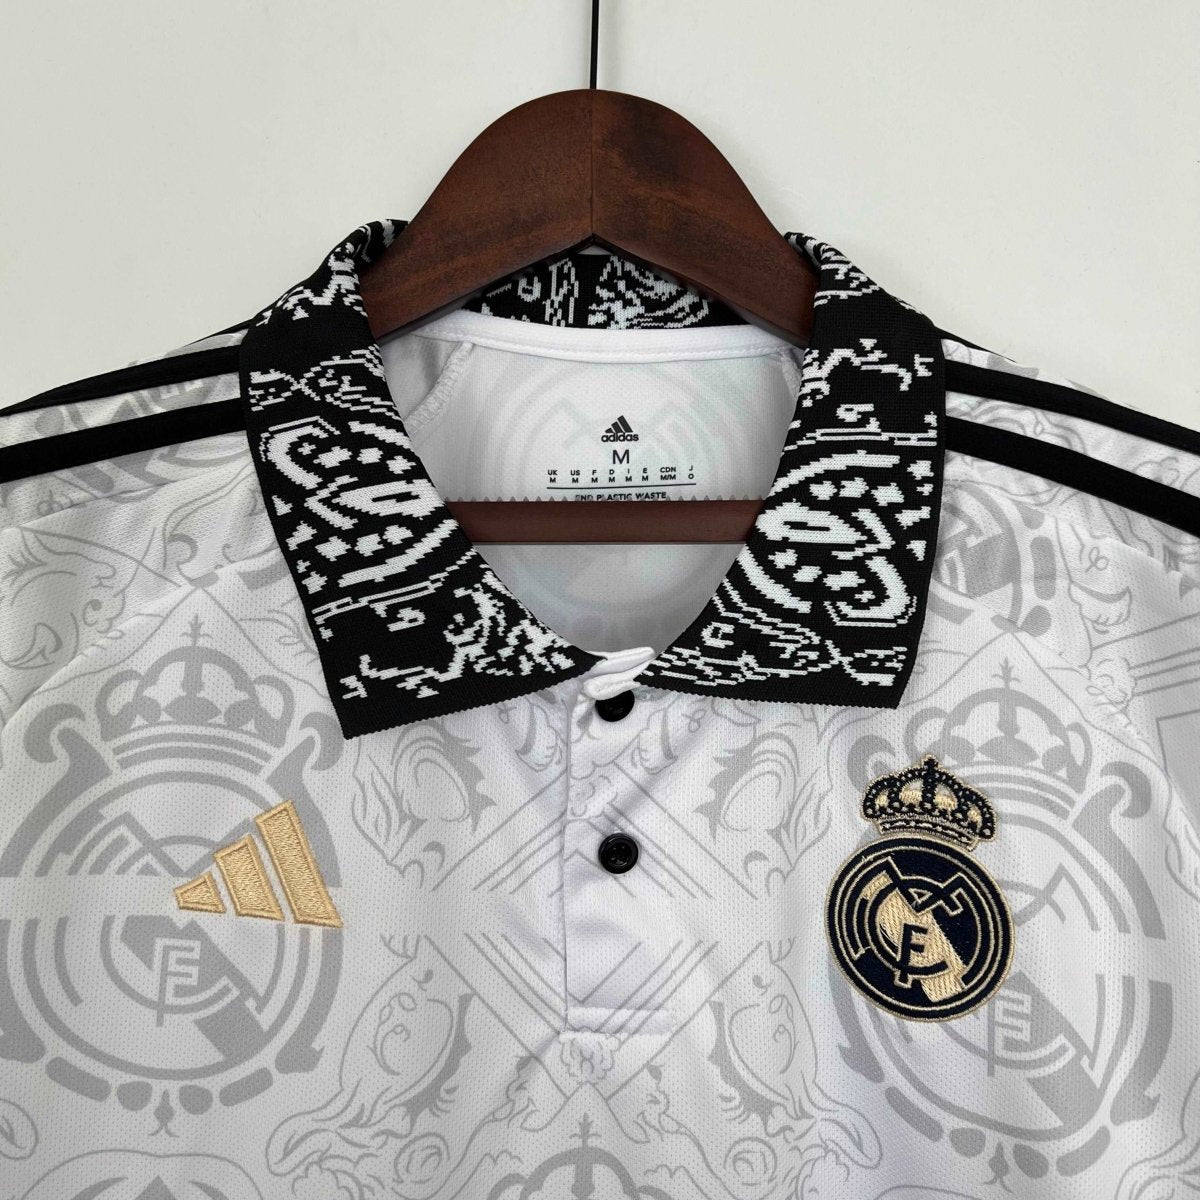 REAL MADRID 23/24 SPECIAL EDITION (WHITE) HOME SHIRT - Shirt - False9Fits